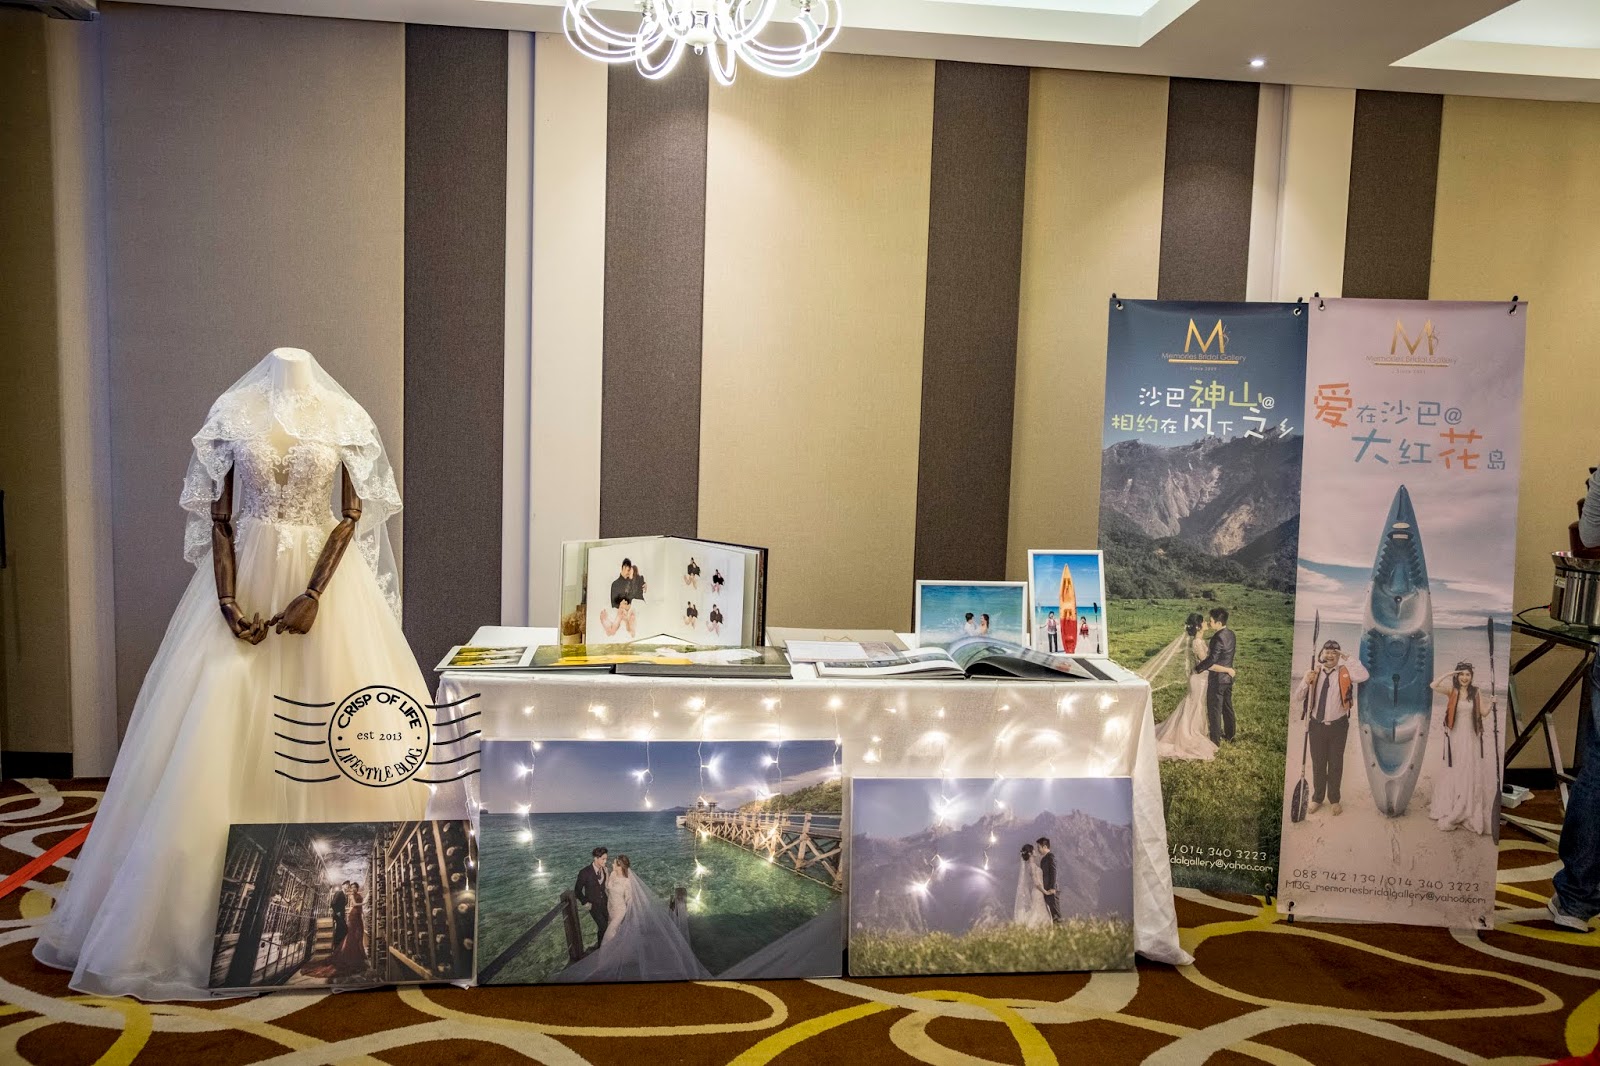 Iconic Hotel Penang introducing their new Wedding and Corporate Package